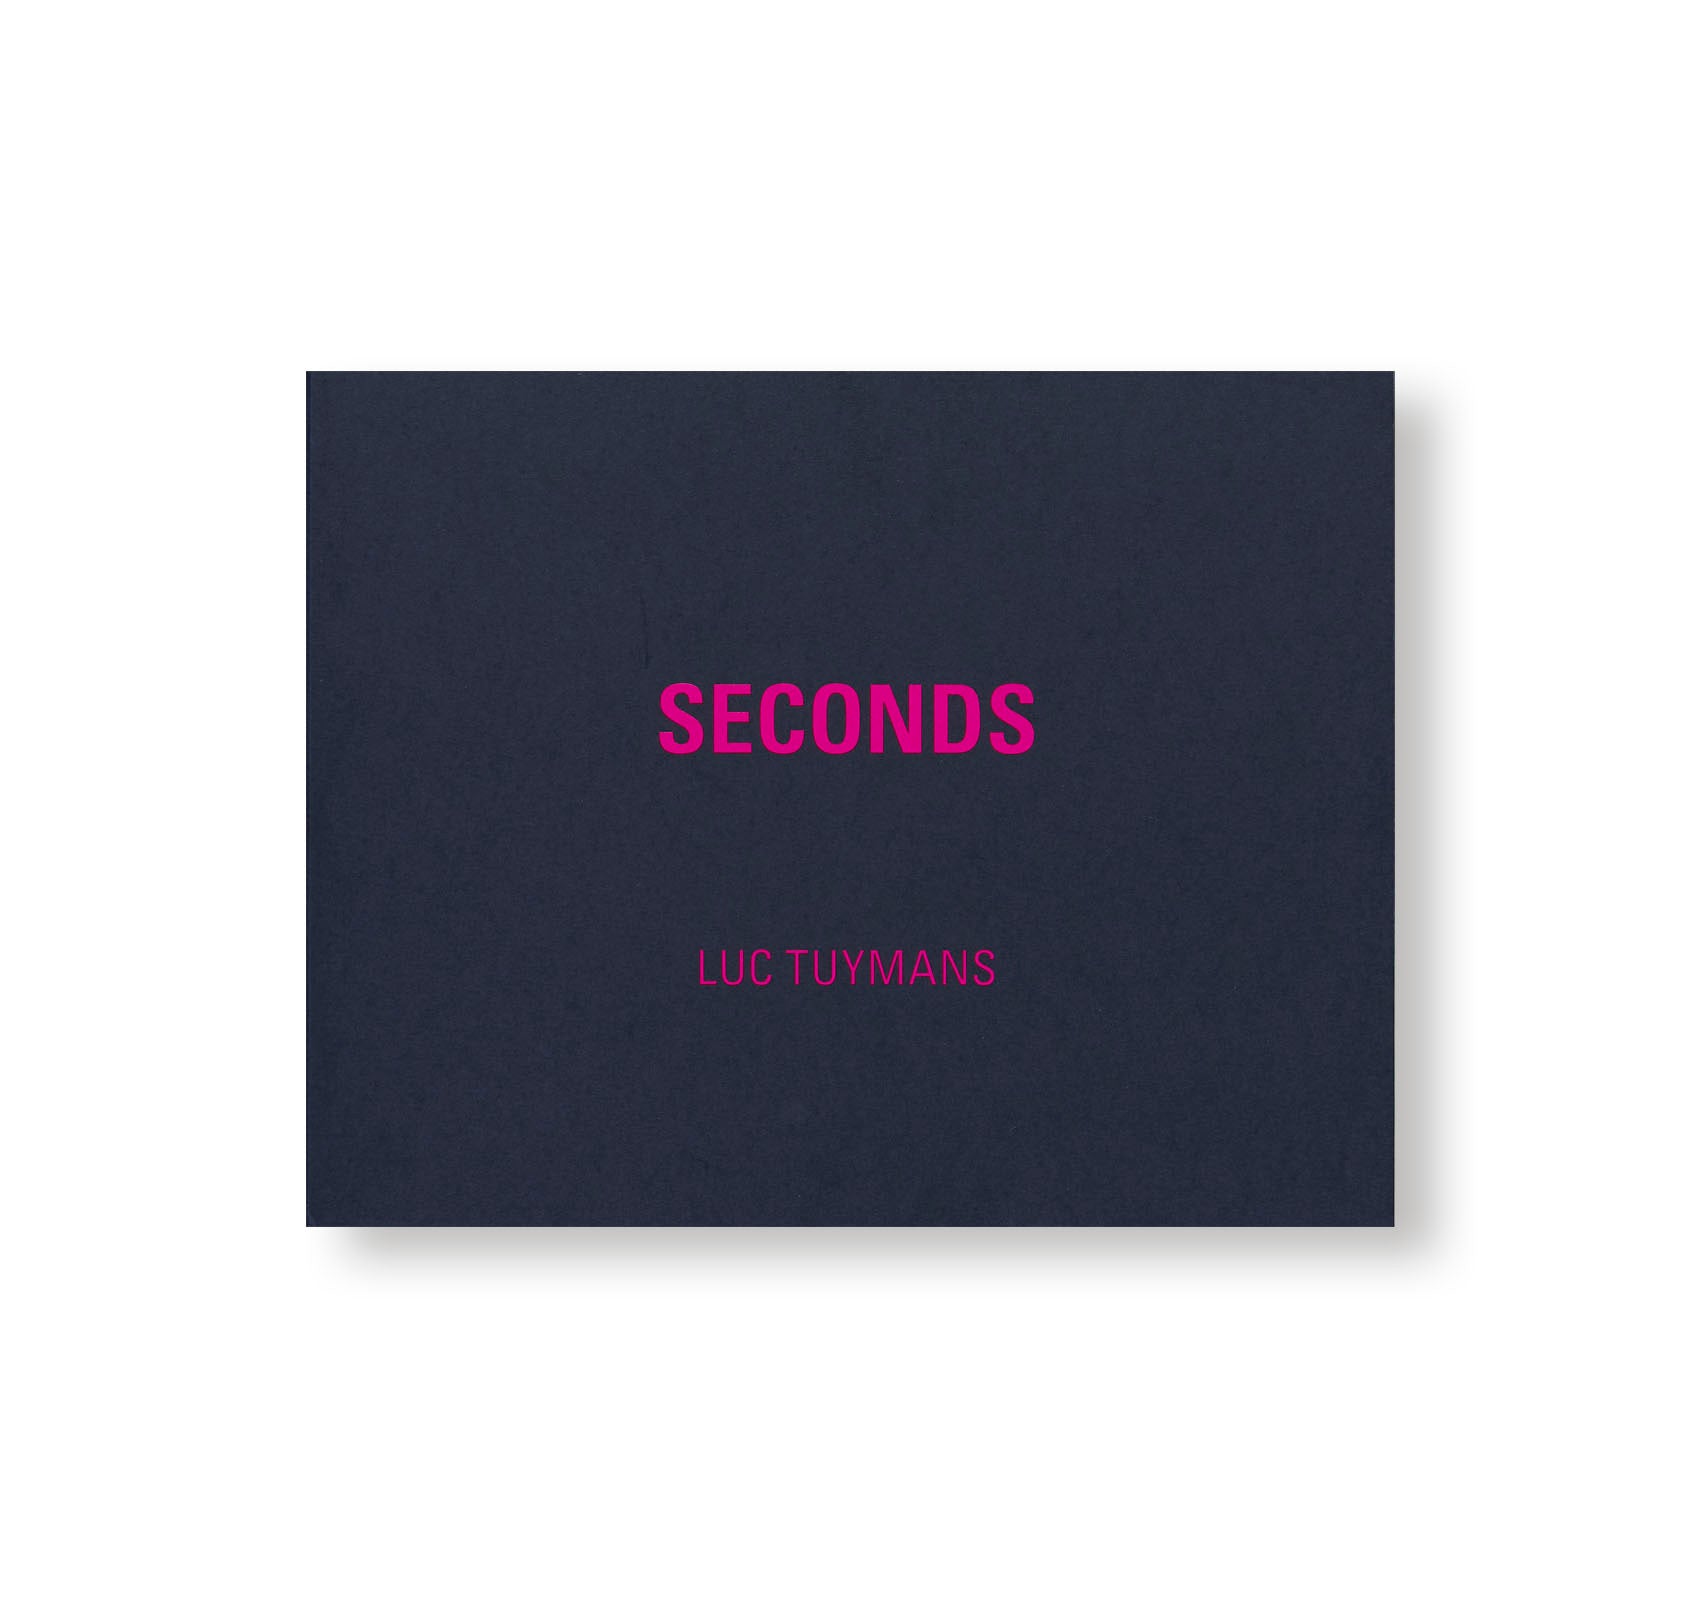 SECONDS by Luc Tuymans